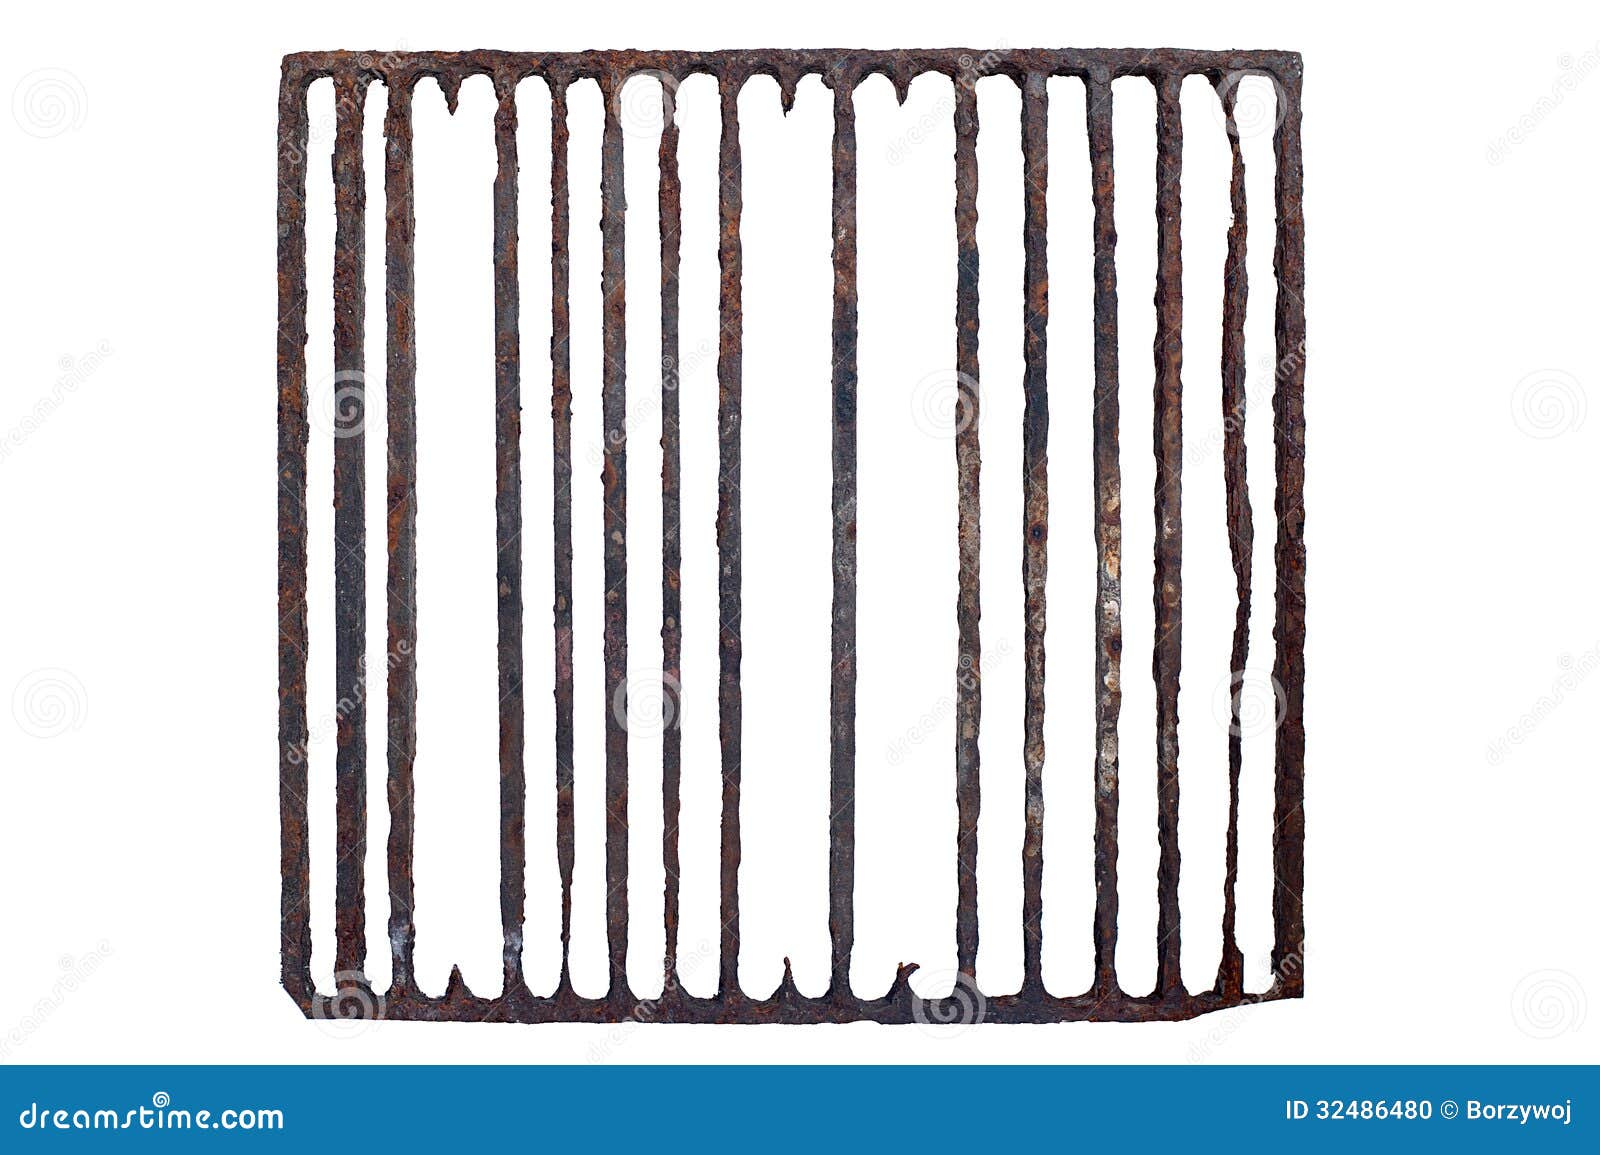 old, rusty prison grating